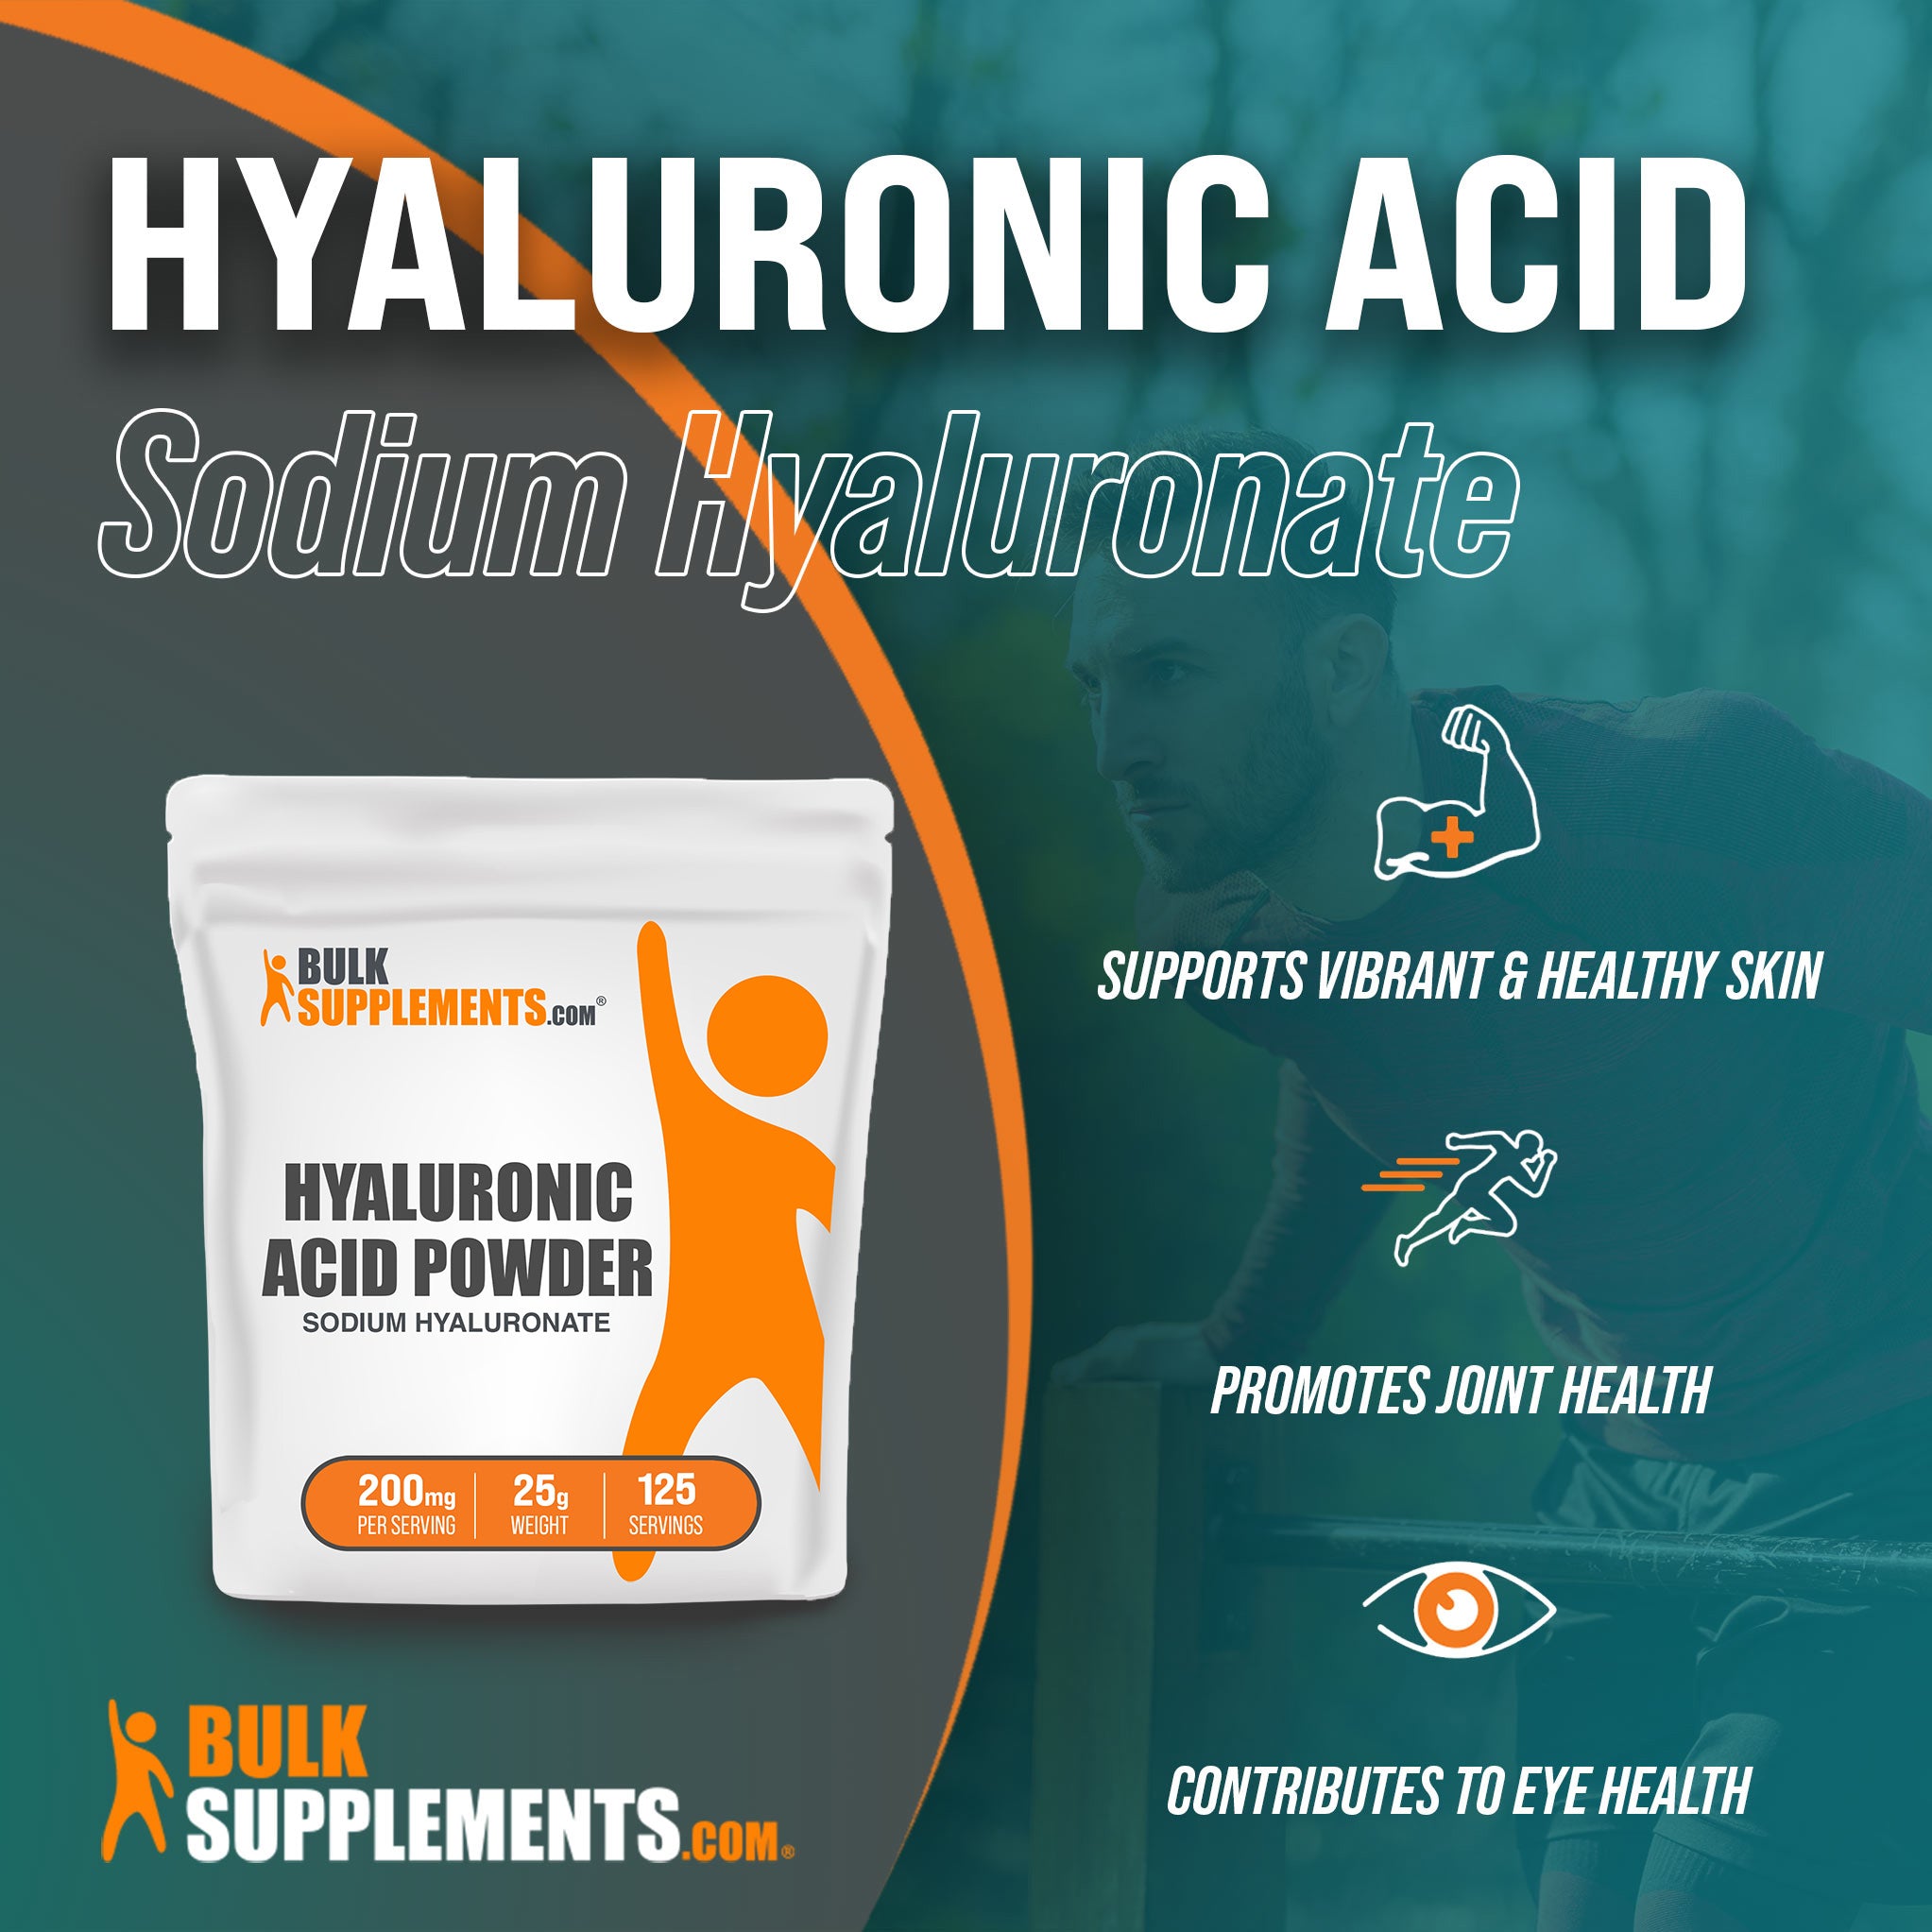 Benefits of Hyaluronic Acid: supports vibrant and healthy skin, promotes joint health, contributes to eye health